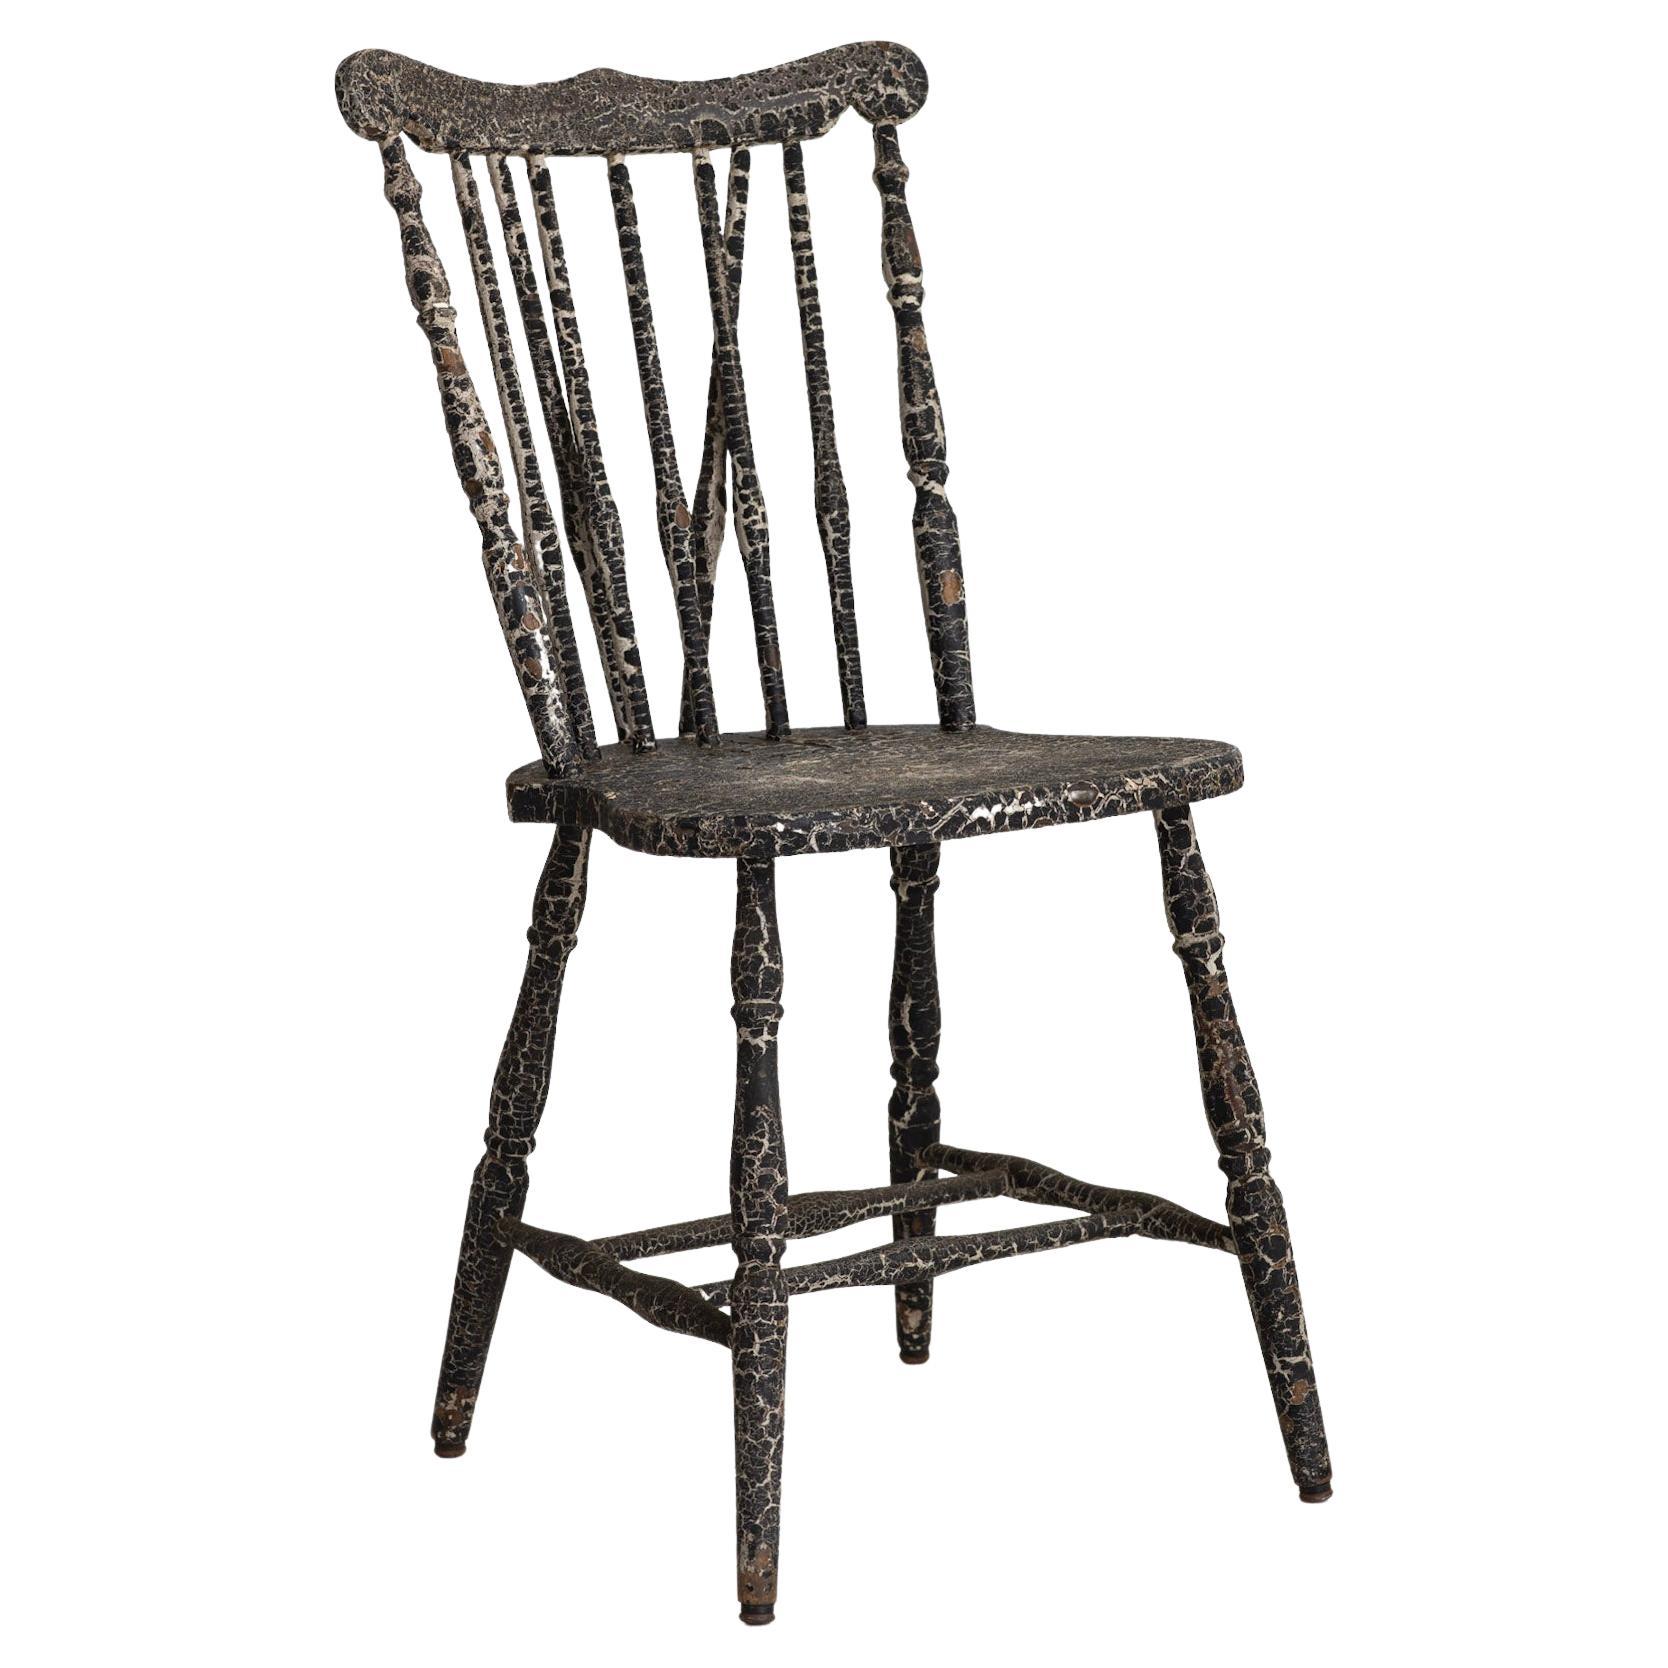 Mid 20th Century Highly Patinaed Rustic Chair For Sale at 1stDibs